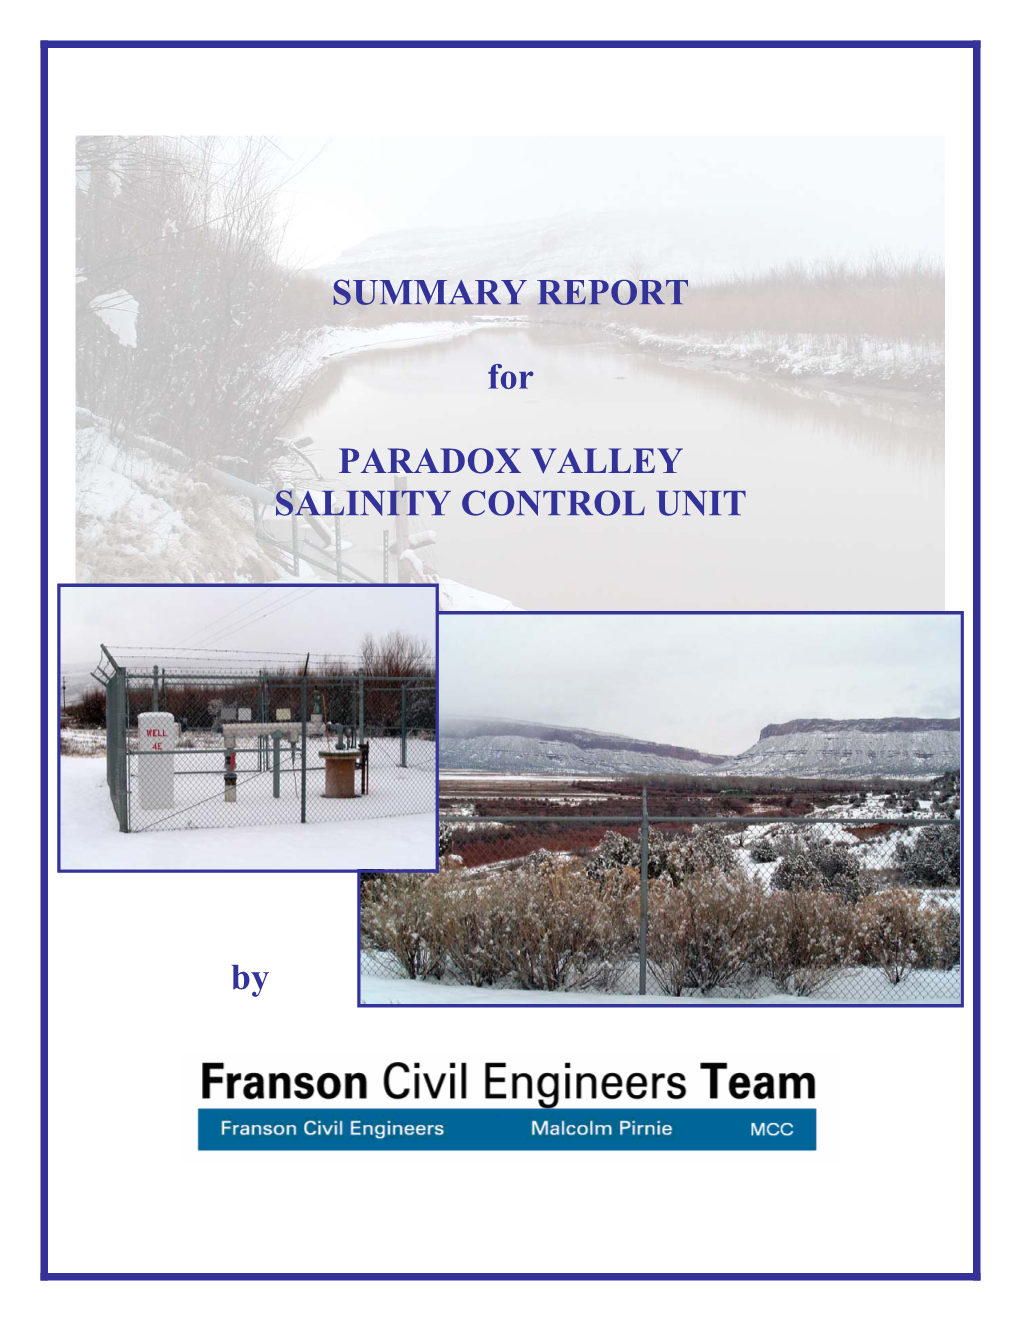 SUMMARY REPORT for PARADOX VALLEY SALINITY CONTROL UNIT